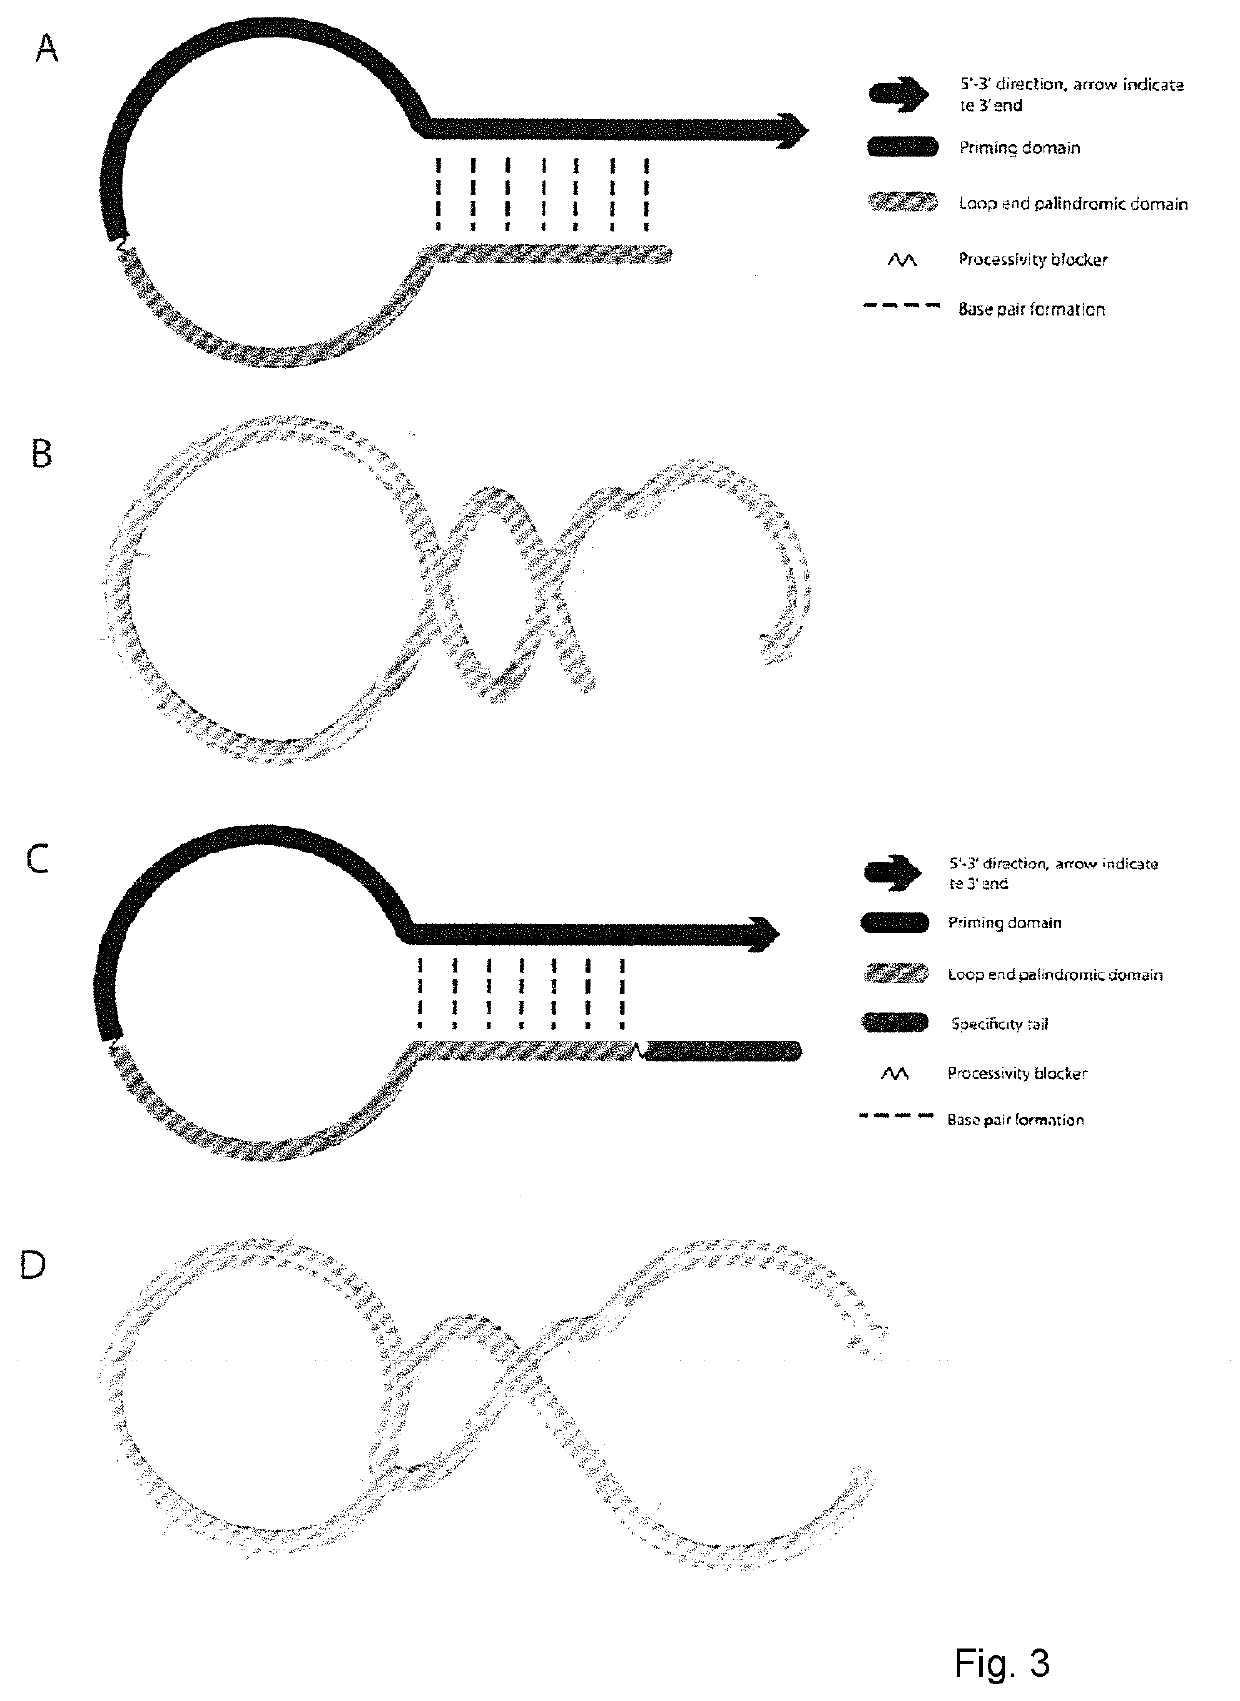 Molecular fingerprinting methods to detect and genotype DNA targets through polymerase chain reaction